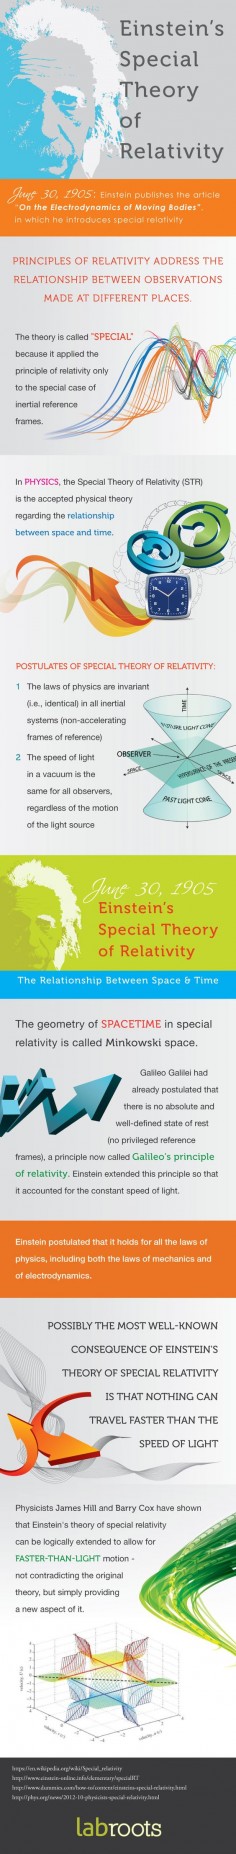 Einstein's Special Theory of Relativity Explained | LabRoots | Infographics For the Scientific and Medical Community